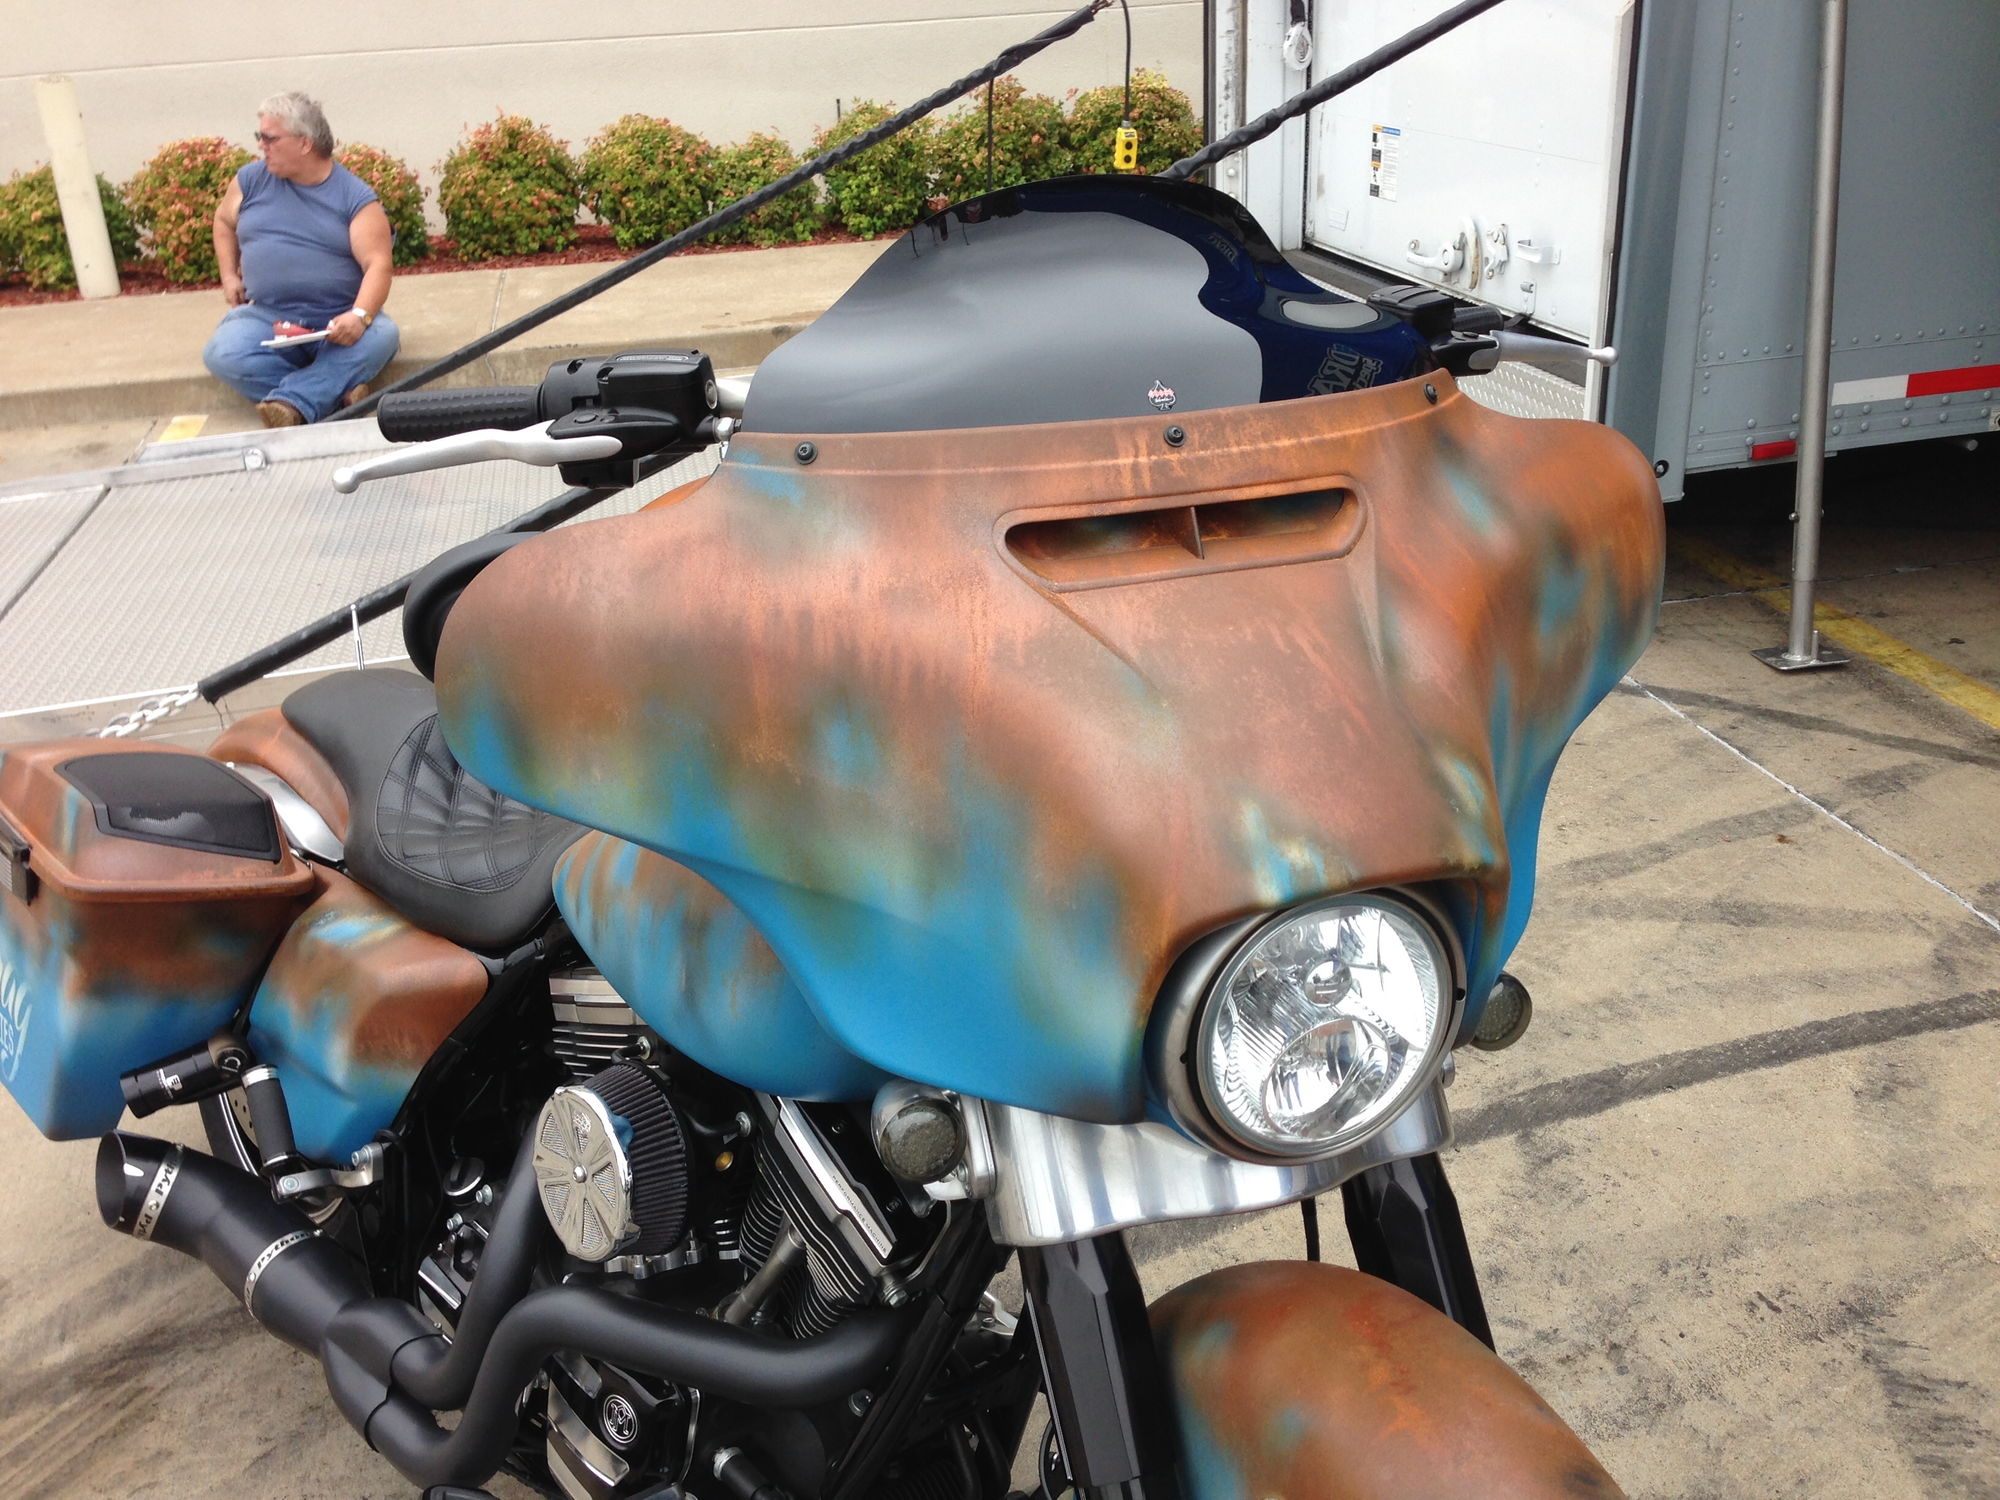 new harley davidson with patina paint job for sale in ohio